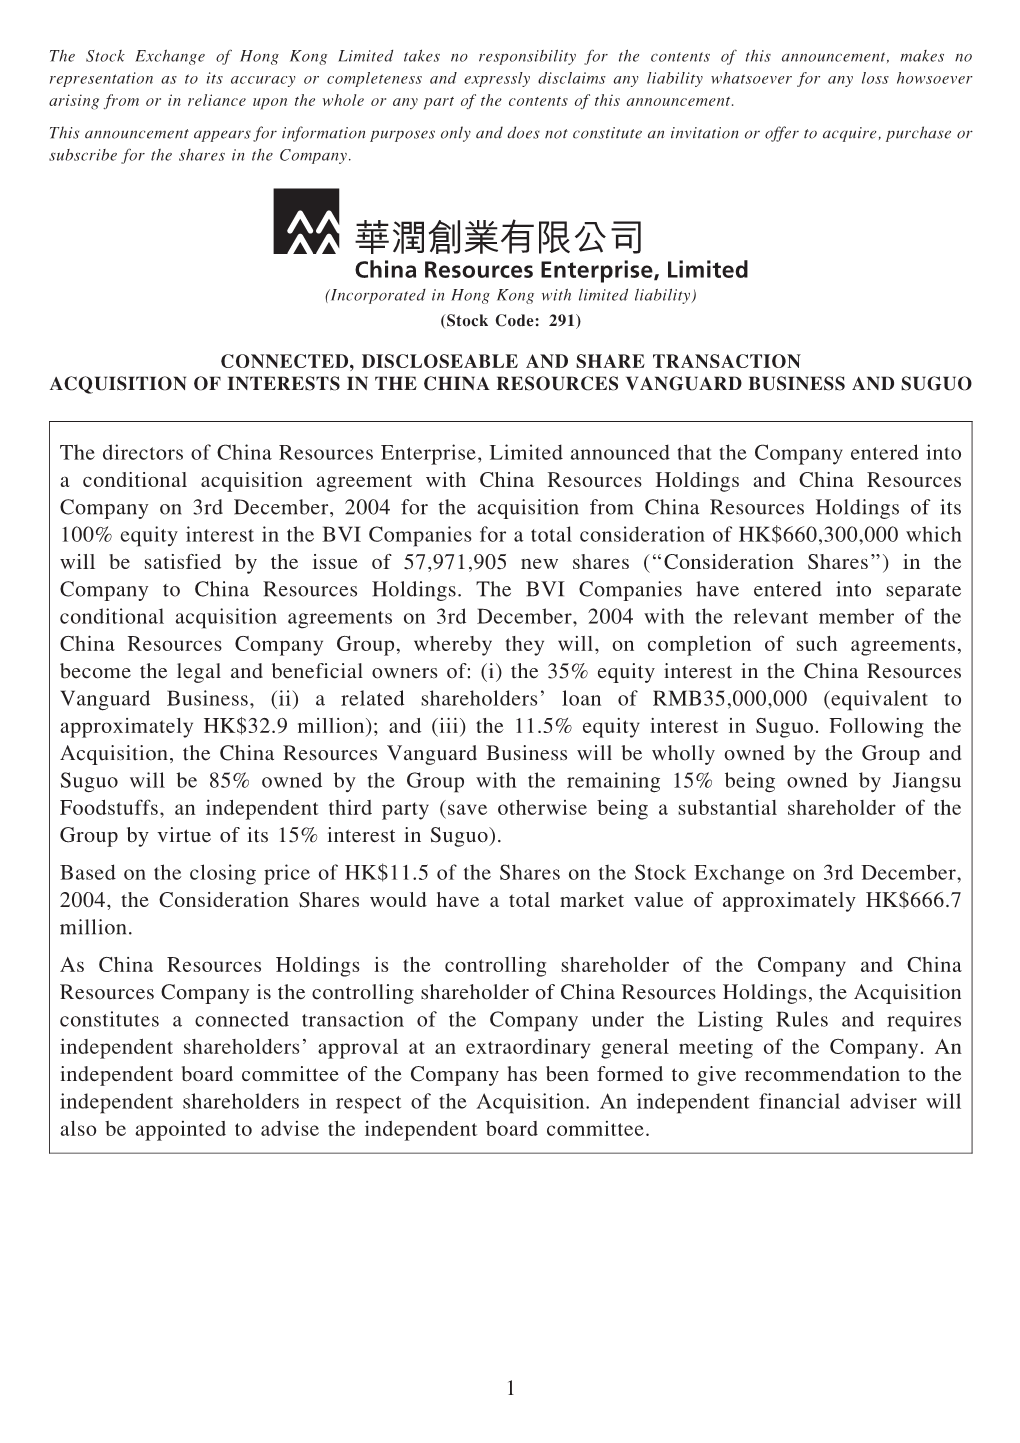 The Directors of China Resources Enterprise, Limited Announced That